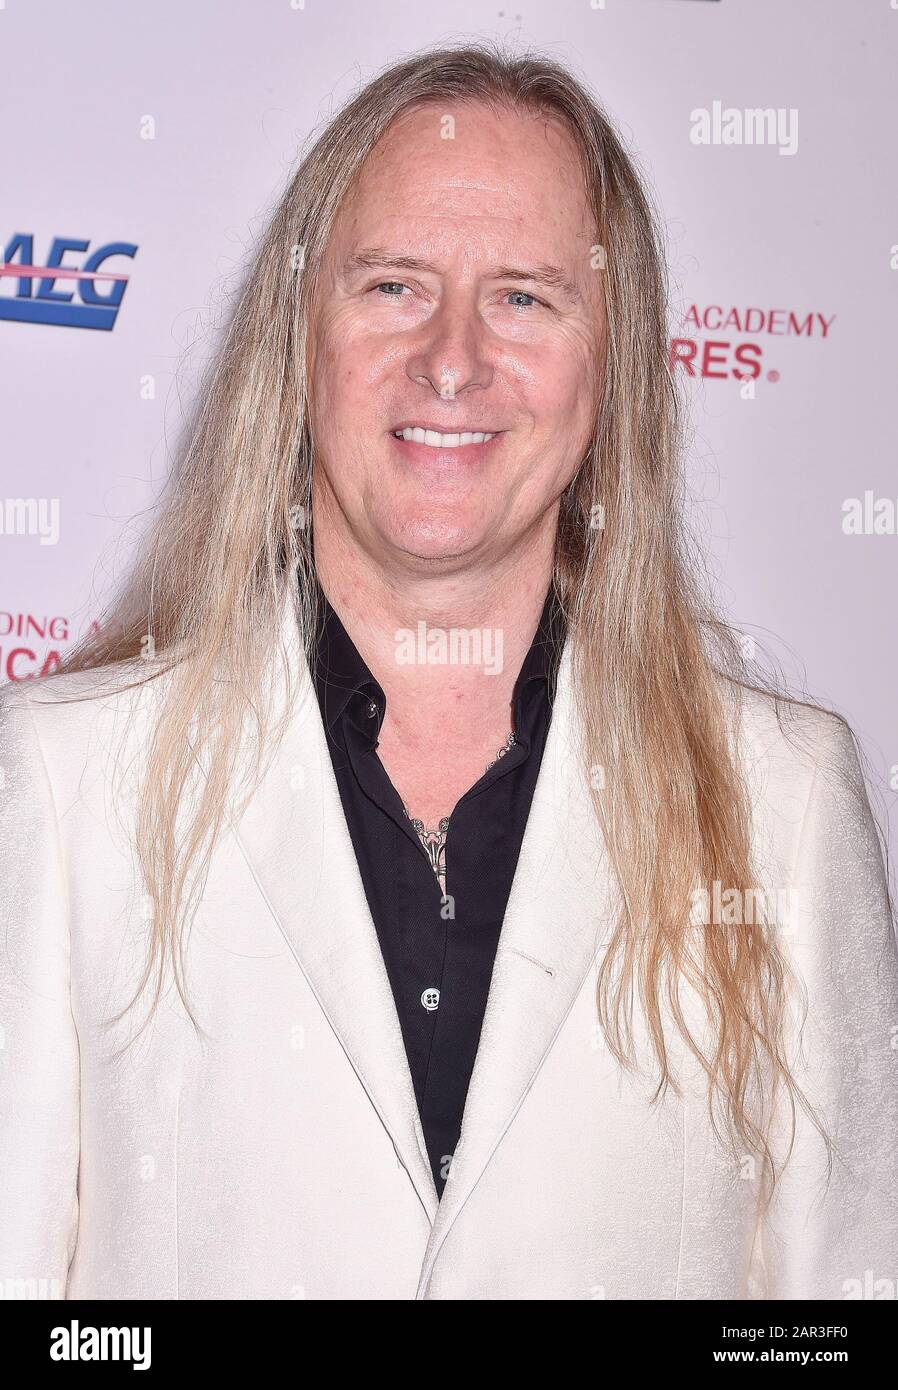 LOS ANGELES, CA - JANUARY 24: Jerry Cantrell of Alice In Chains attends the 2020 MusiCares Person Of The Year Honoring Aerosmith at West Hall At Los Angeles Convention Center on January 24, 2020 in Los Angeles, California. Stock Photo